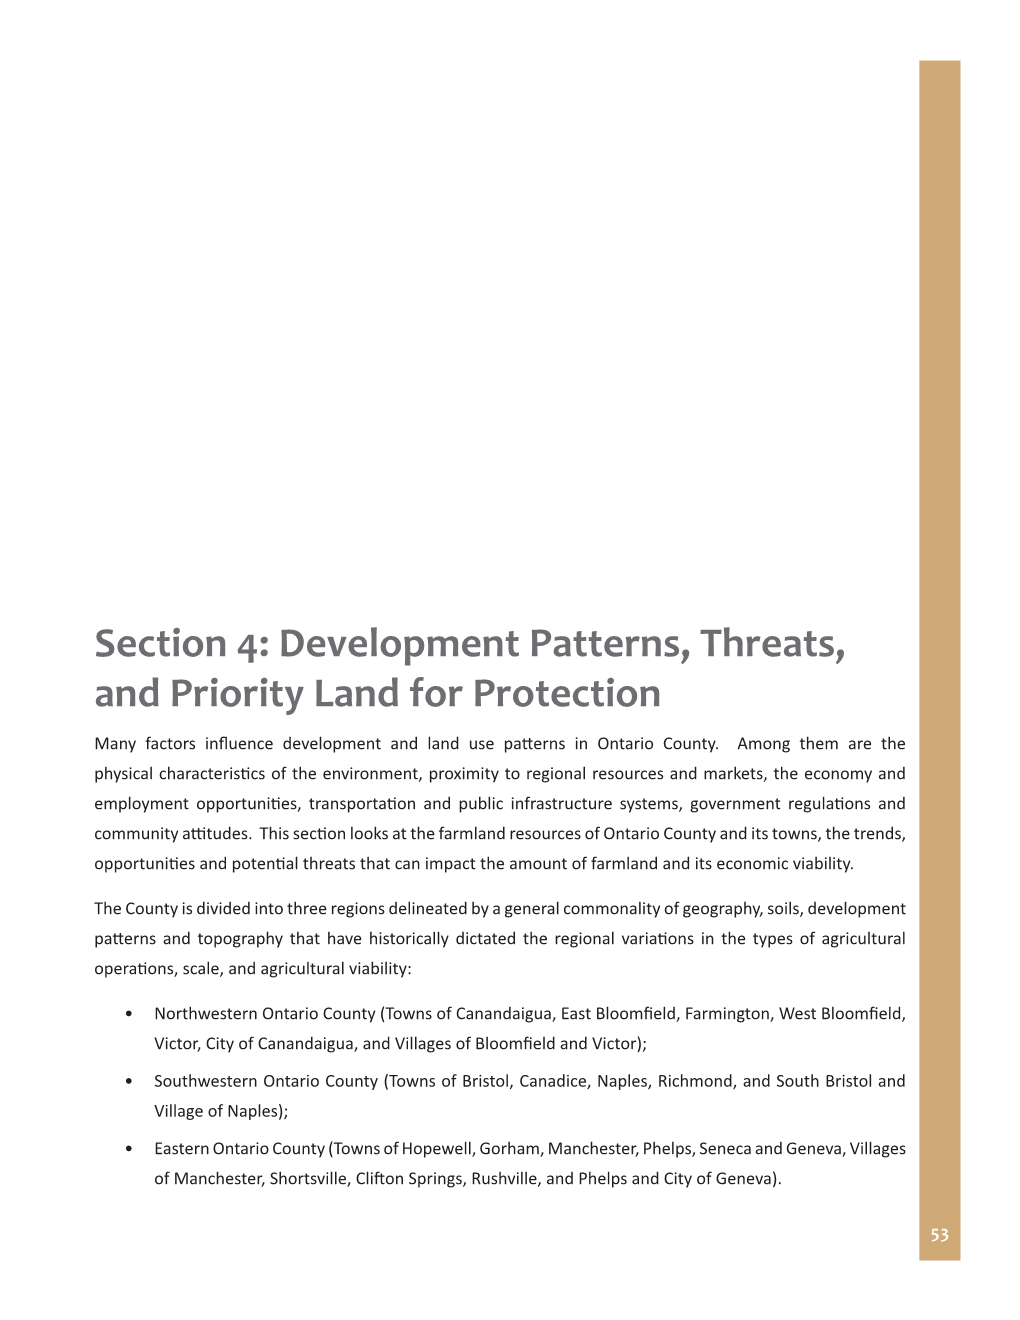 Section 4: Development Patterns, Threats, and Priority Land for Protection